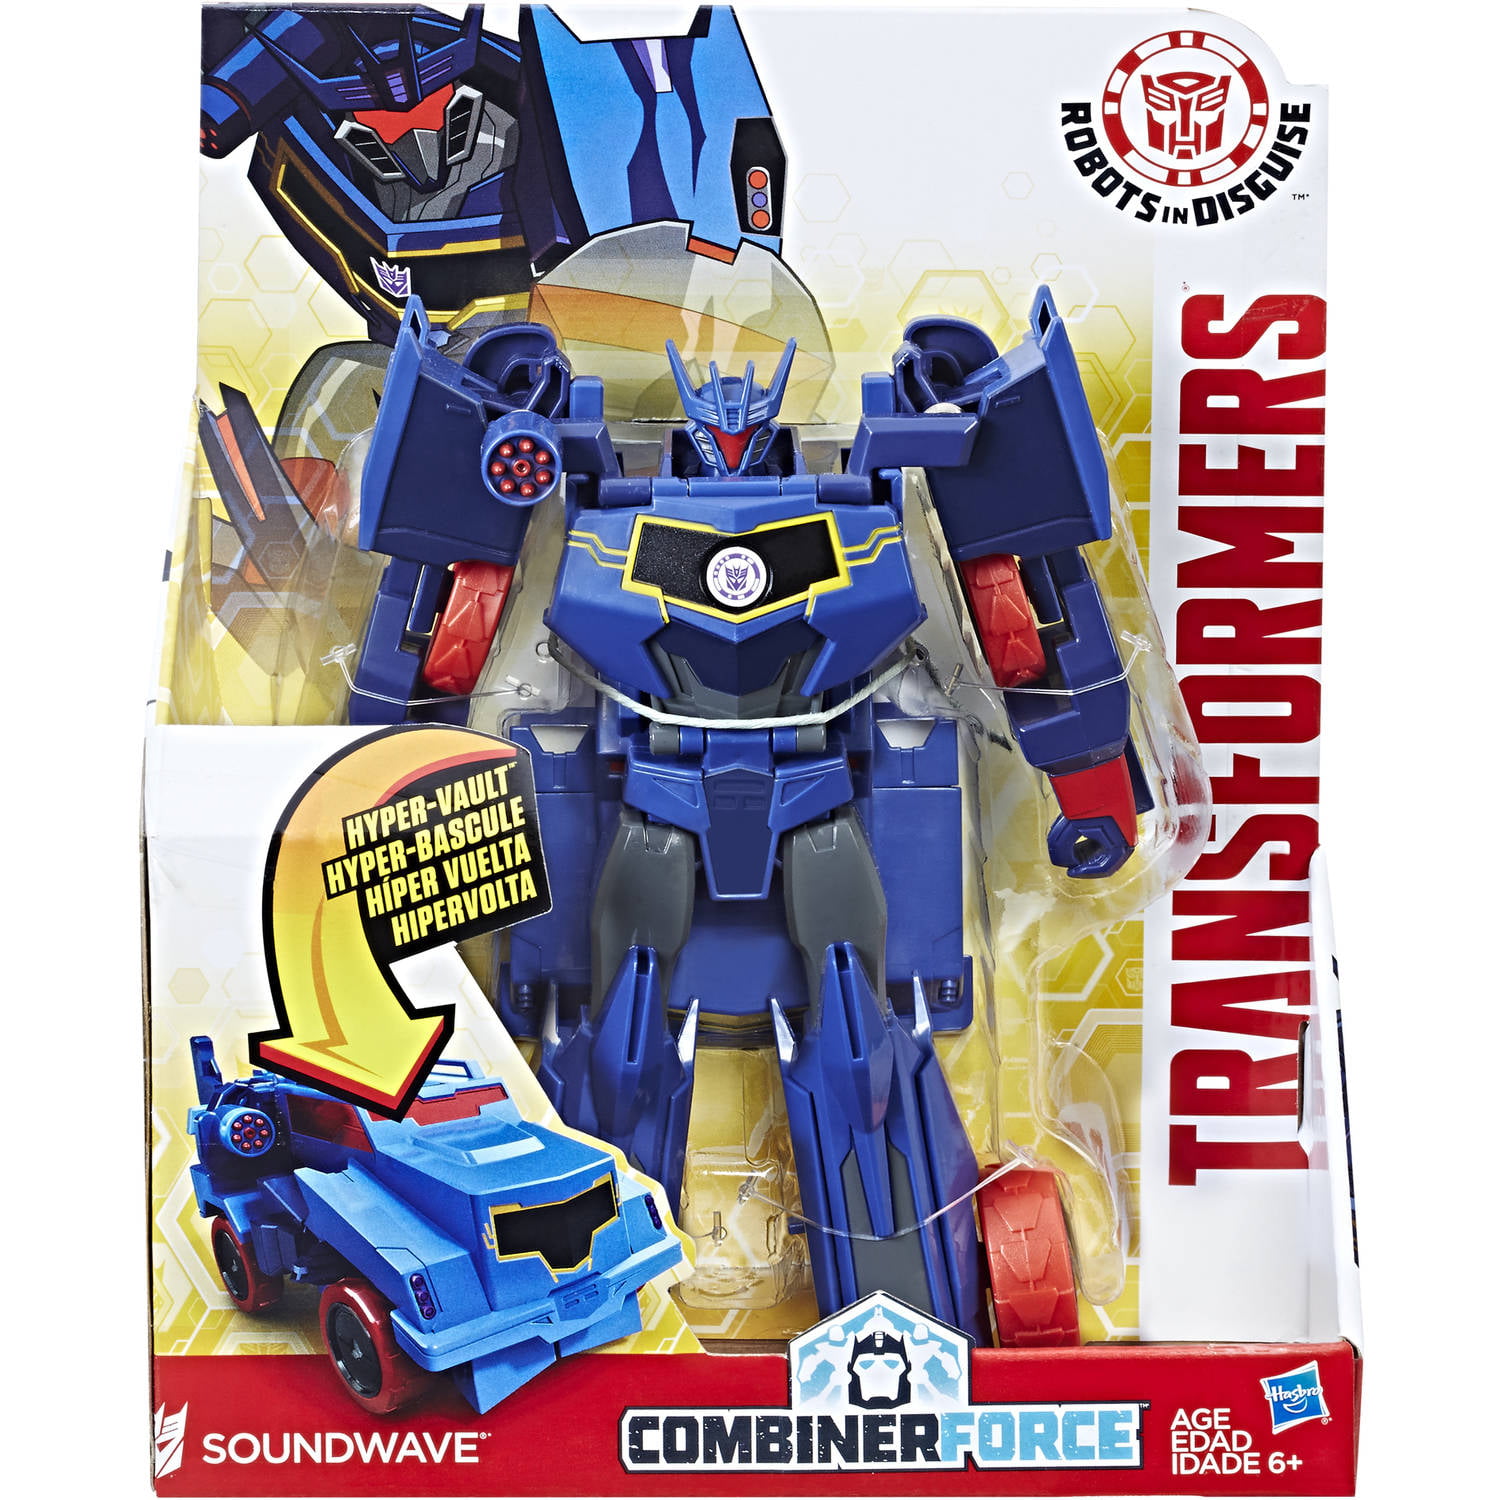 Transformers Robots in Disguise 20cm 3-Step Changers SOUNDWAVE Figure by Hasbro 